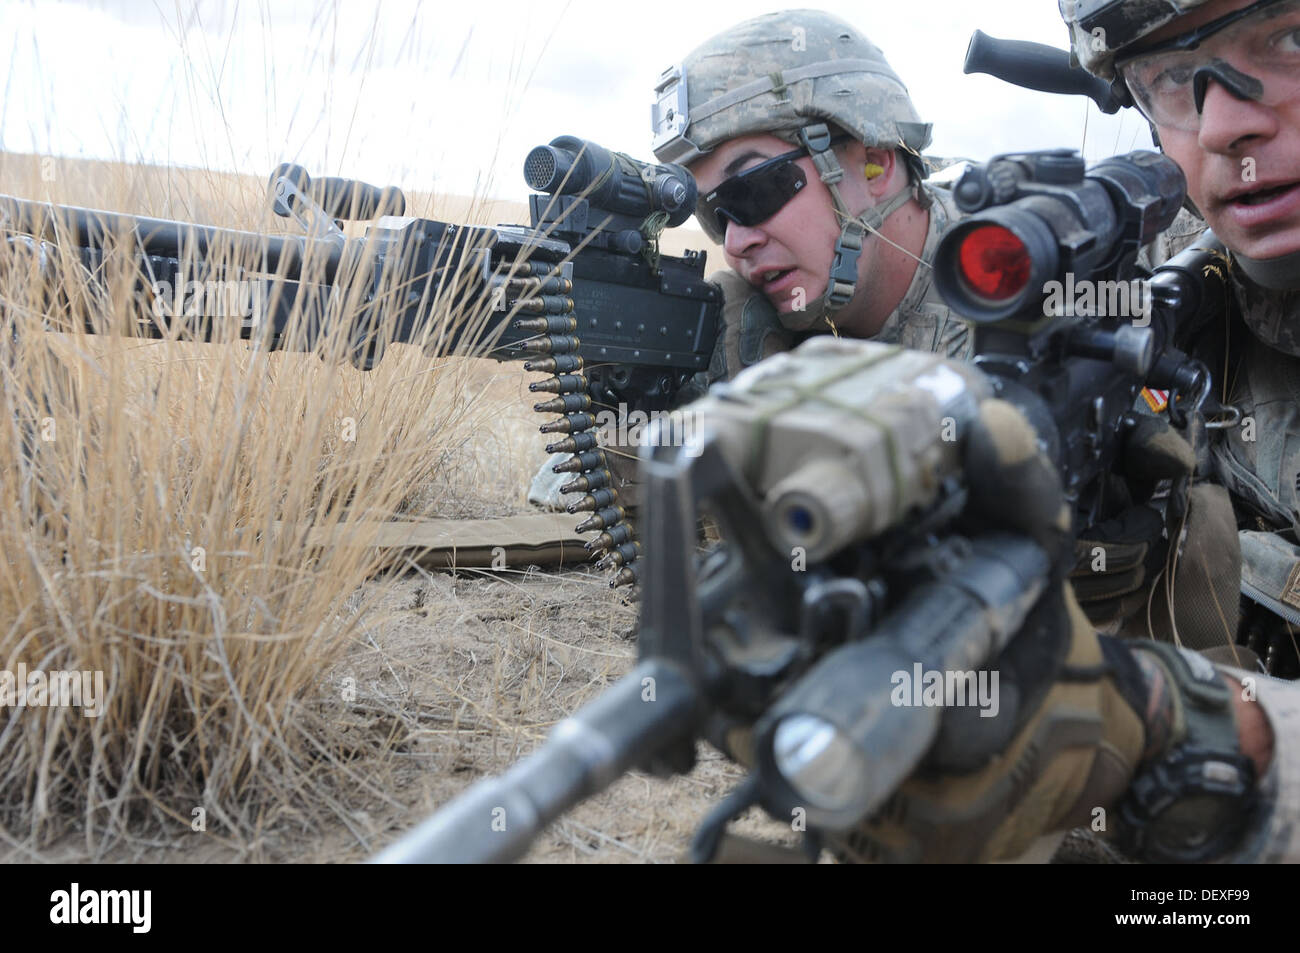 U.S. Army Sgt. Kenton Miller, right, and Spc. James Irvine with 5th Battalion, 20th Infantry Regiment, 3rd Stryker Brigade Combat Team, 2nd Infantry Division, look down their sights for possible enemy activity during a joint platoon exercise at the Yakima Stock Photo